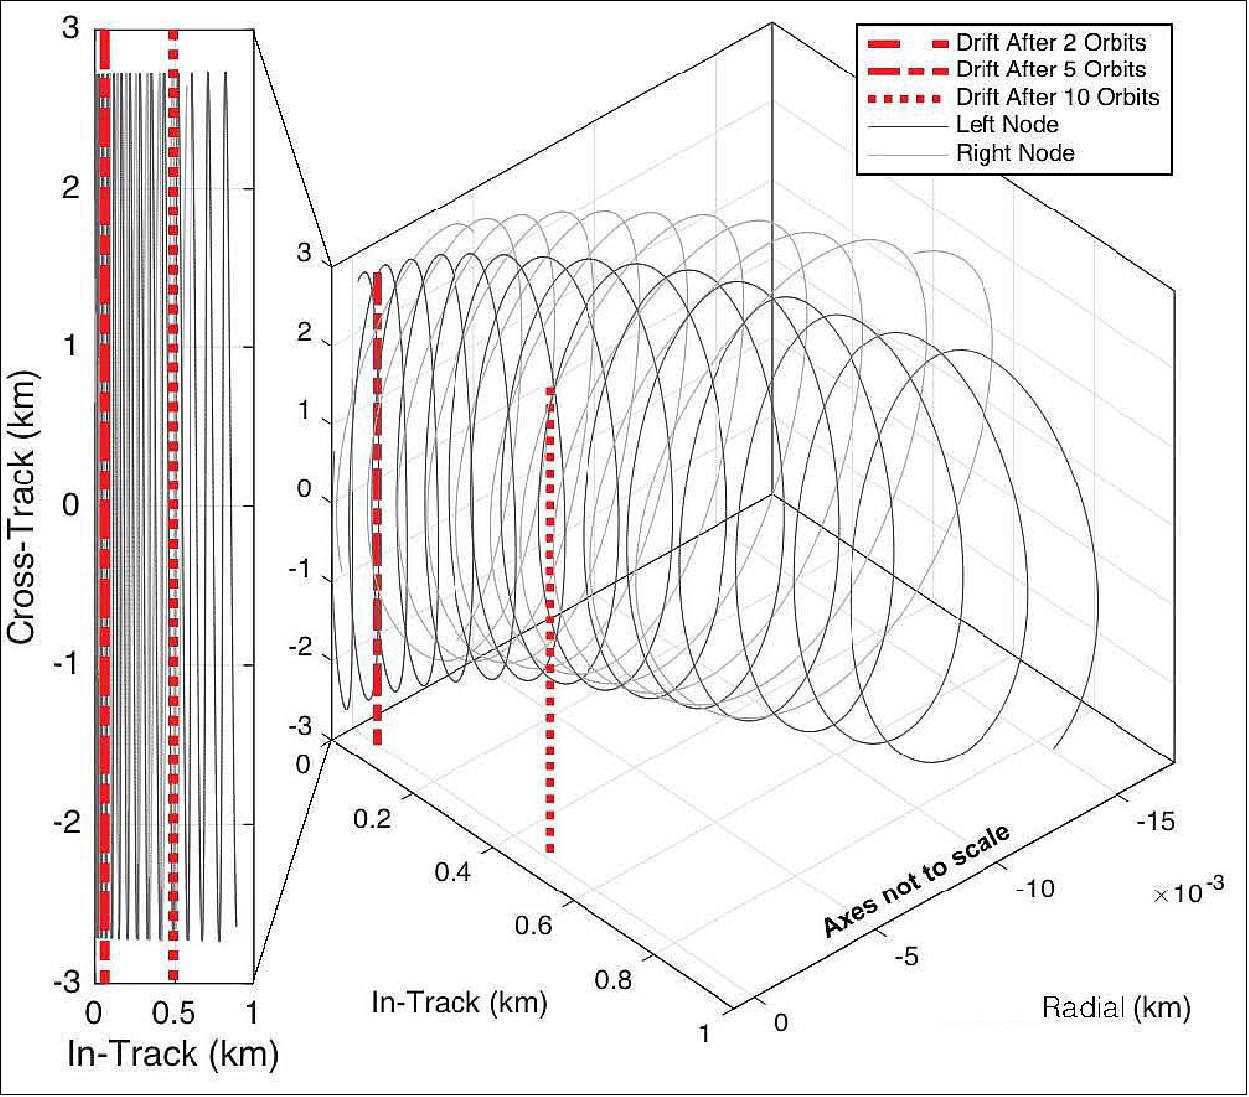 Figure 6: Node-pair deployment referenced to the Mule’s body-fixed coordinates, red dashed lines mark drift after a few orbits (image credit: Boston University)